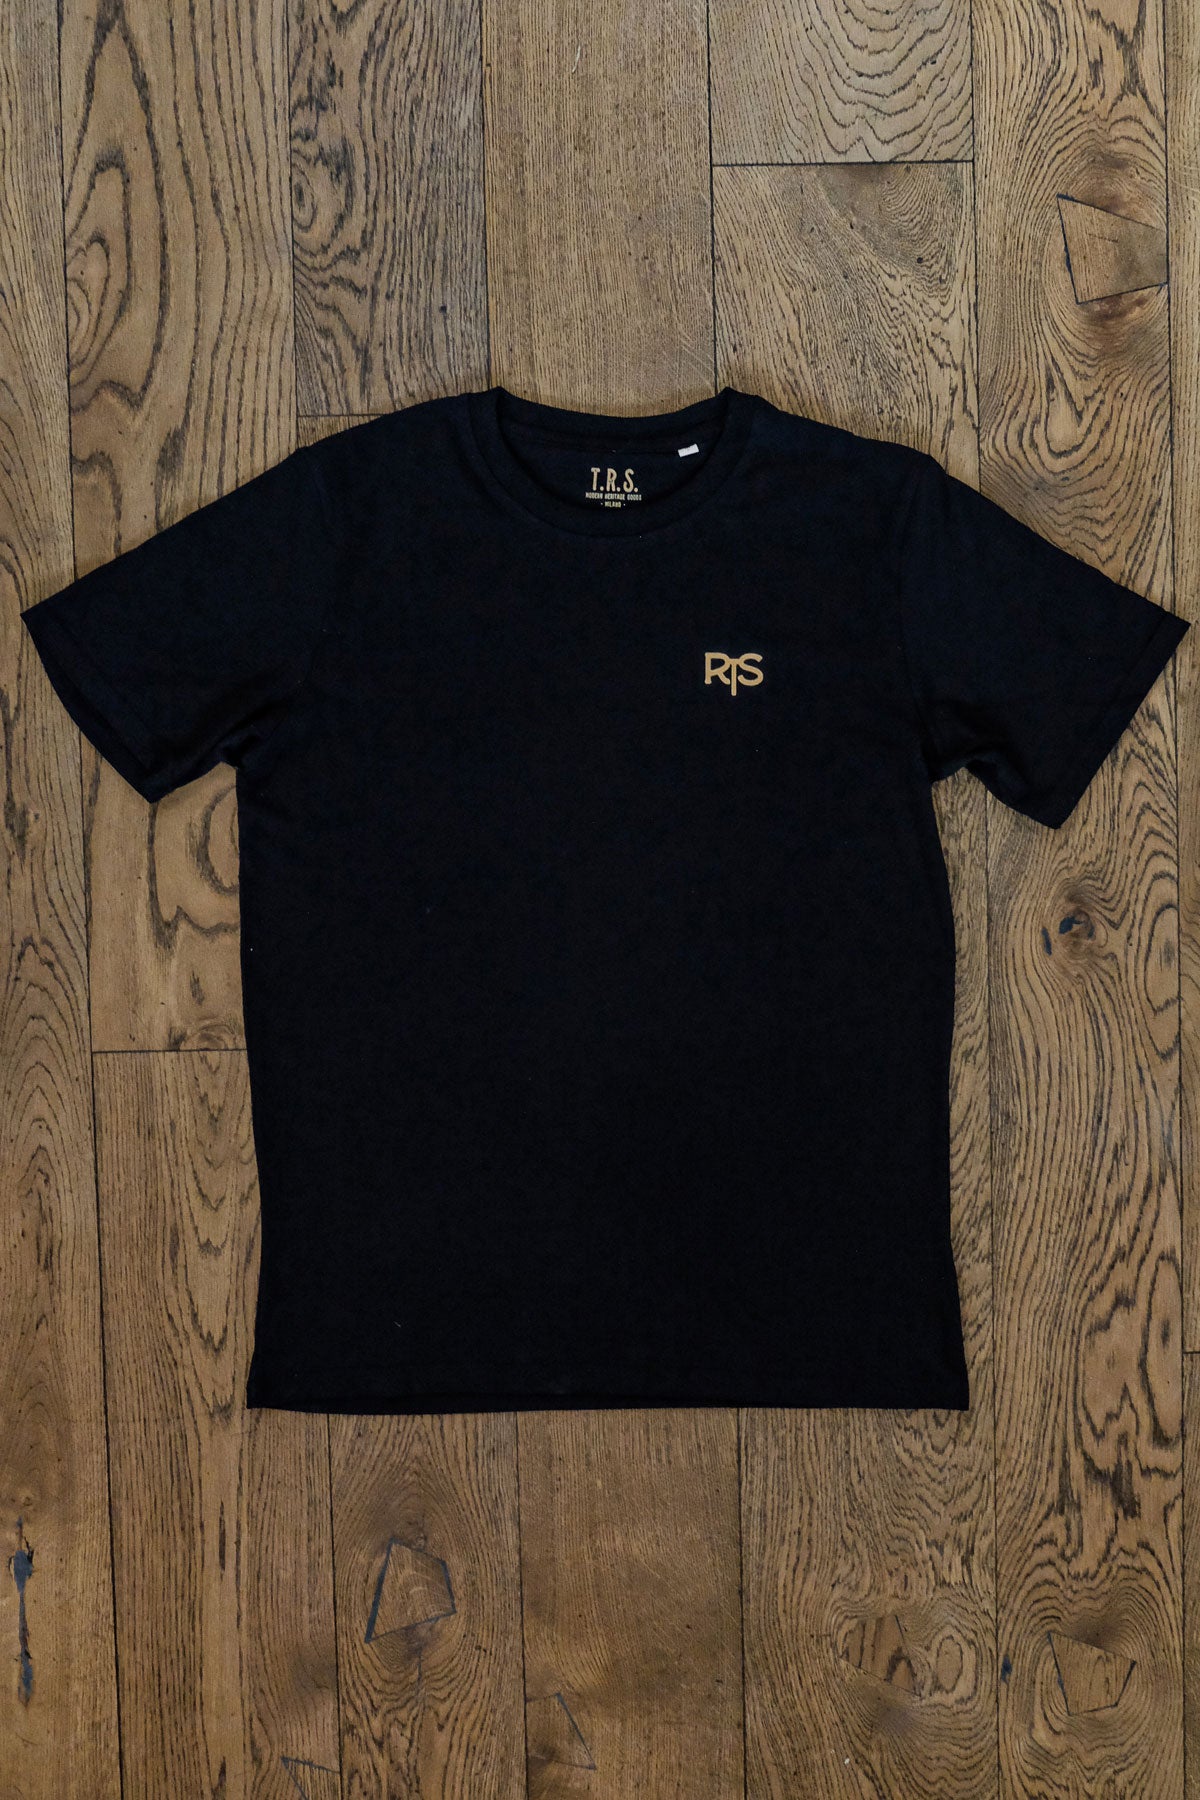 The Rugged Society - Stay Rugged - Heavy 220 G/M²  Black 100% Organic Cotton Tee